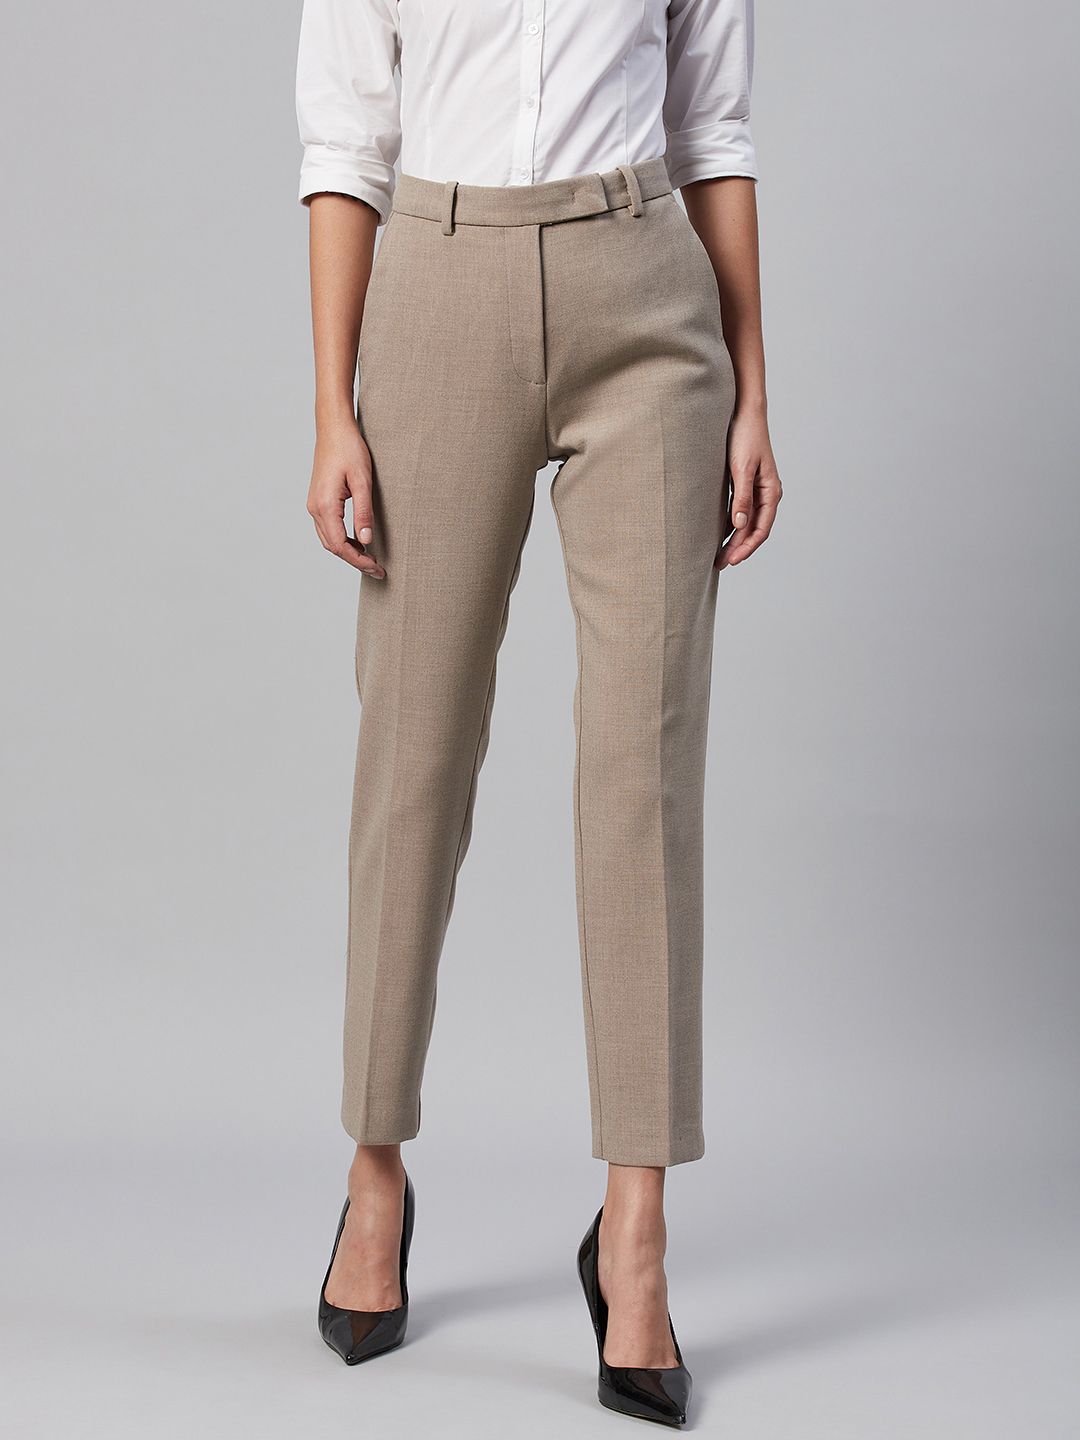 Marks & Spencer Women Brown Slim Fit Trousers Price in India